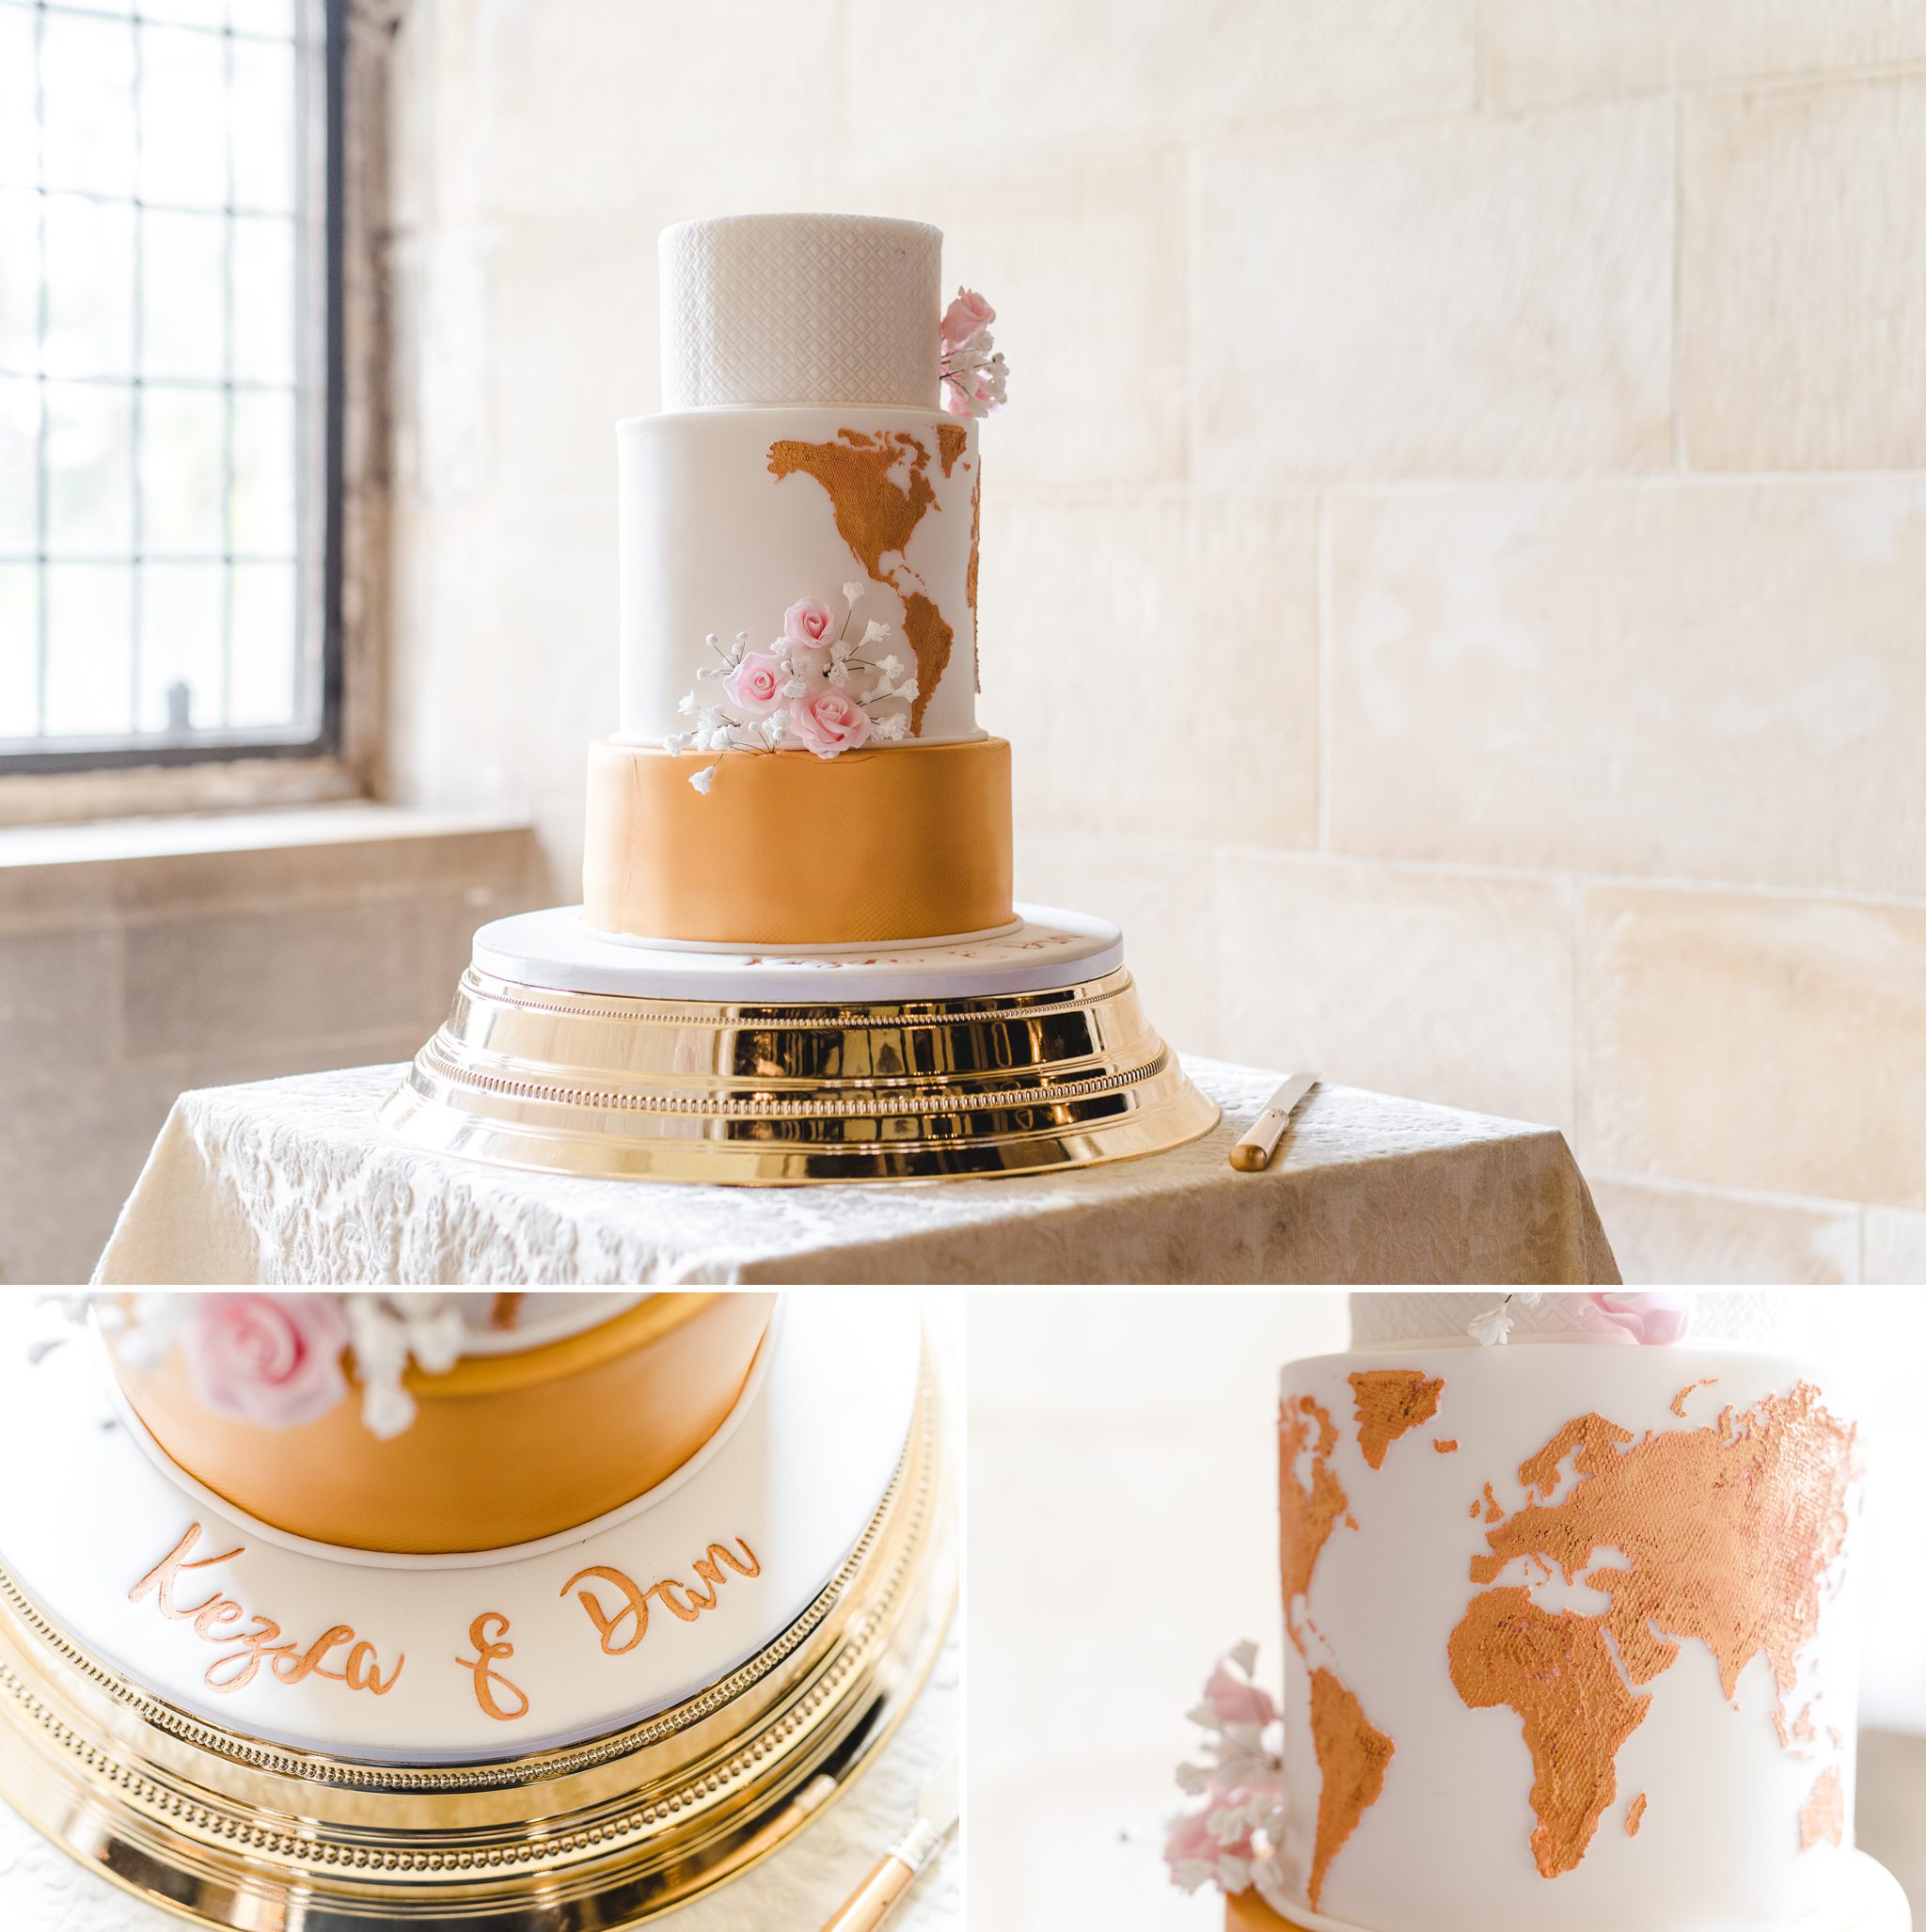 A wedding cake with a gold map of the world on it.